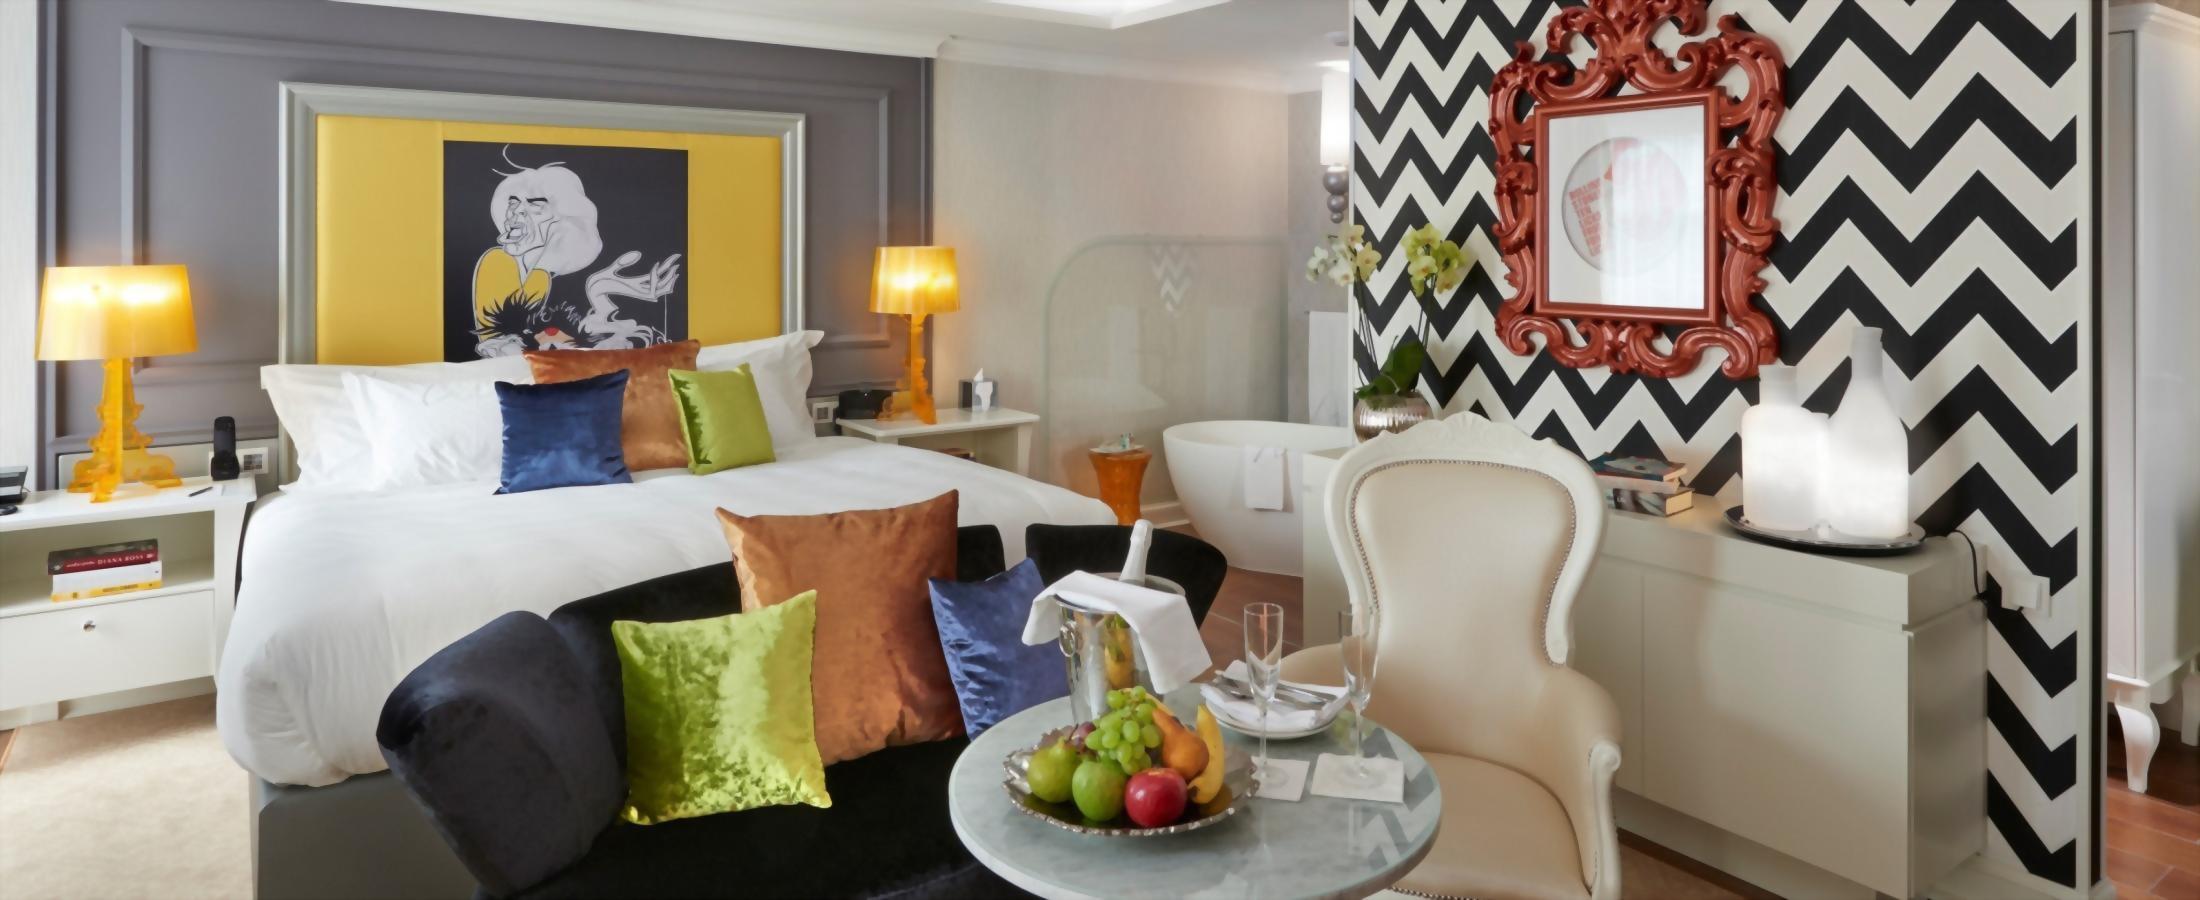 The Aria Hotel Budapest offers a number of wonderful stay enhancements that can be added to any reservation.